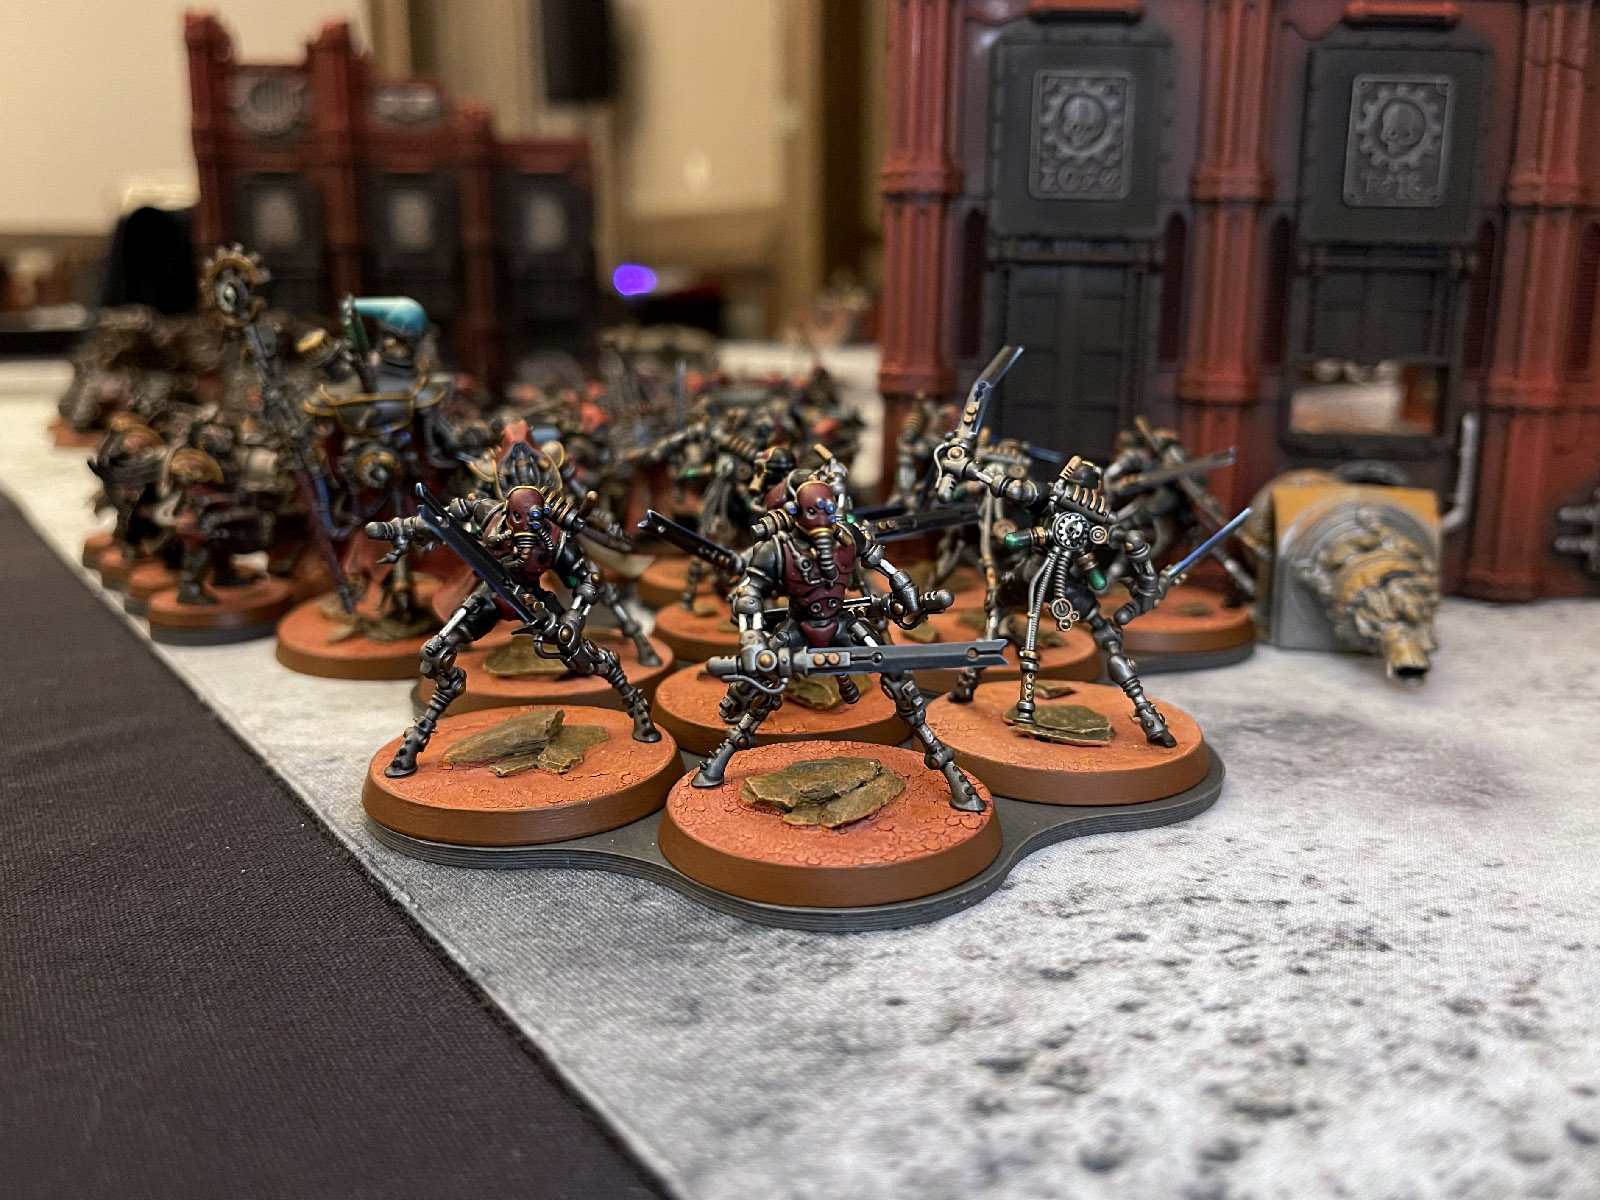 Sicarian Ruststalkers on Magnet Baron movement trays